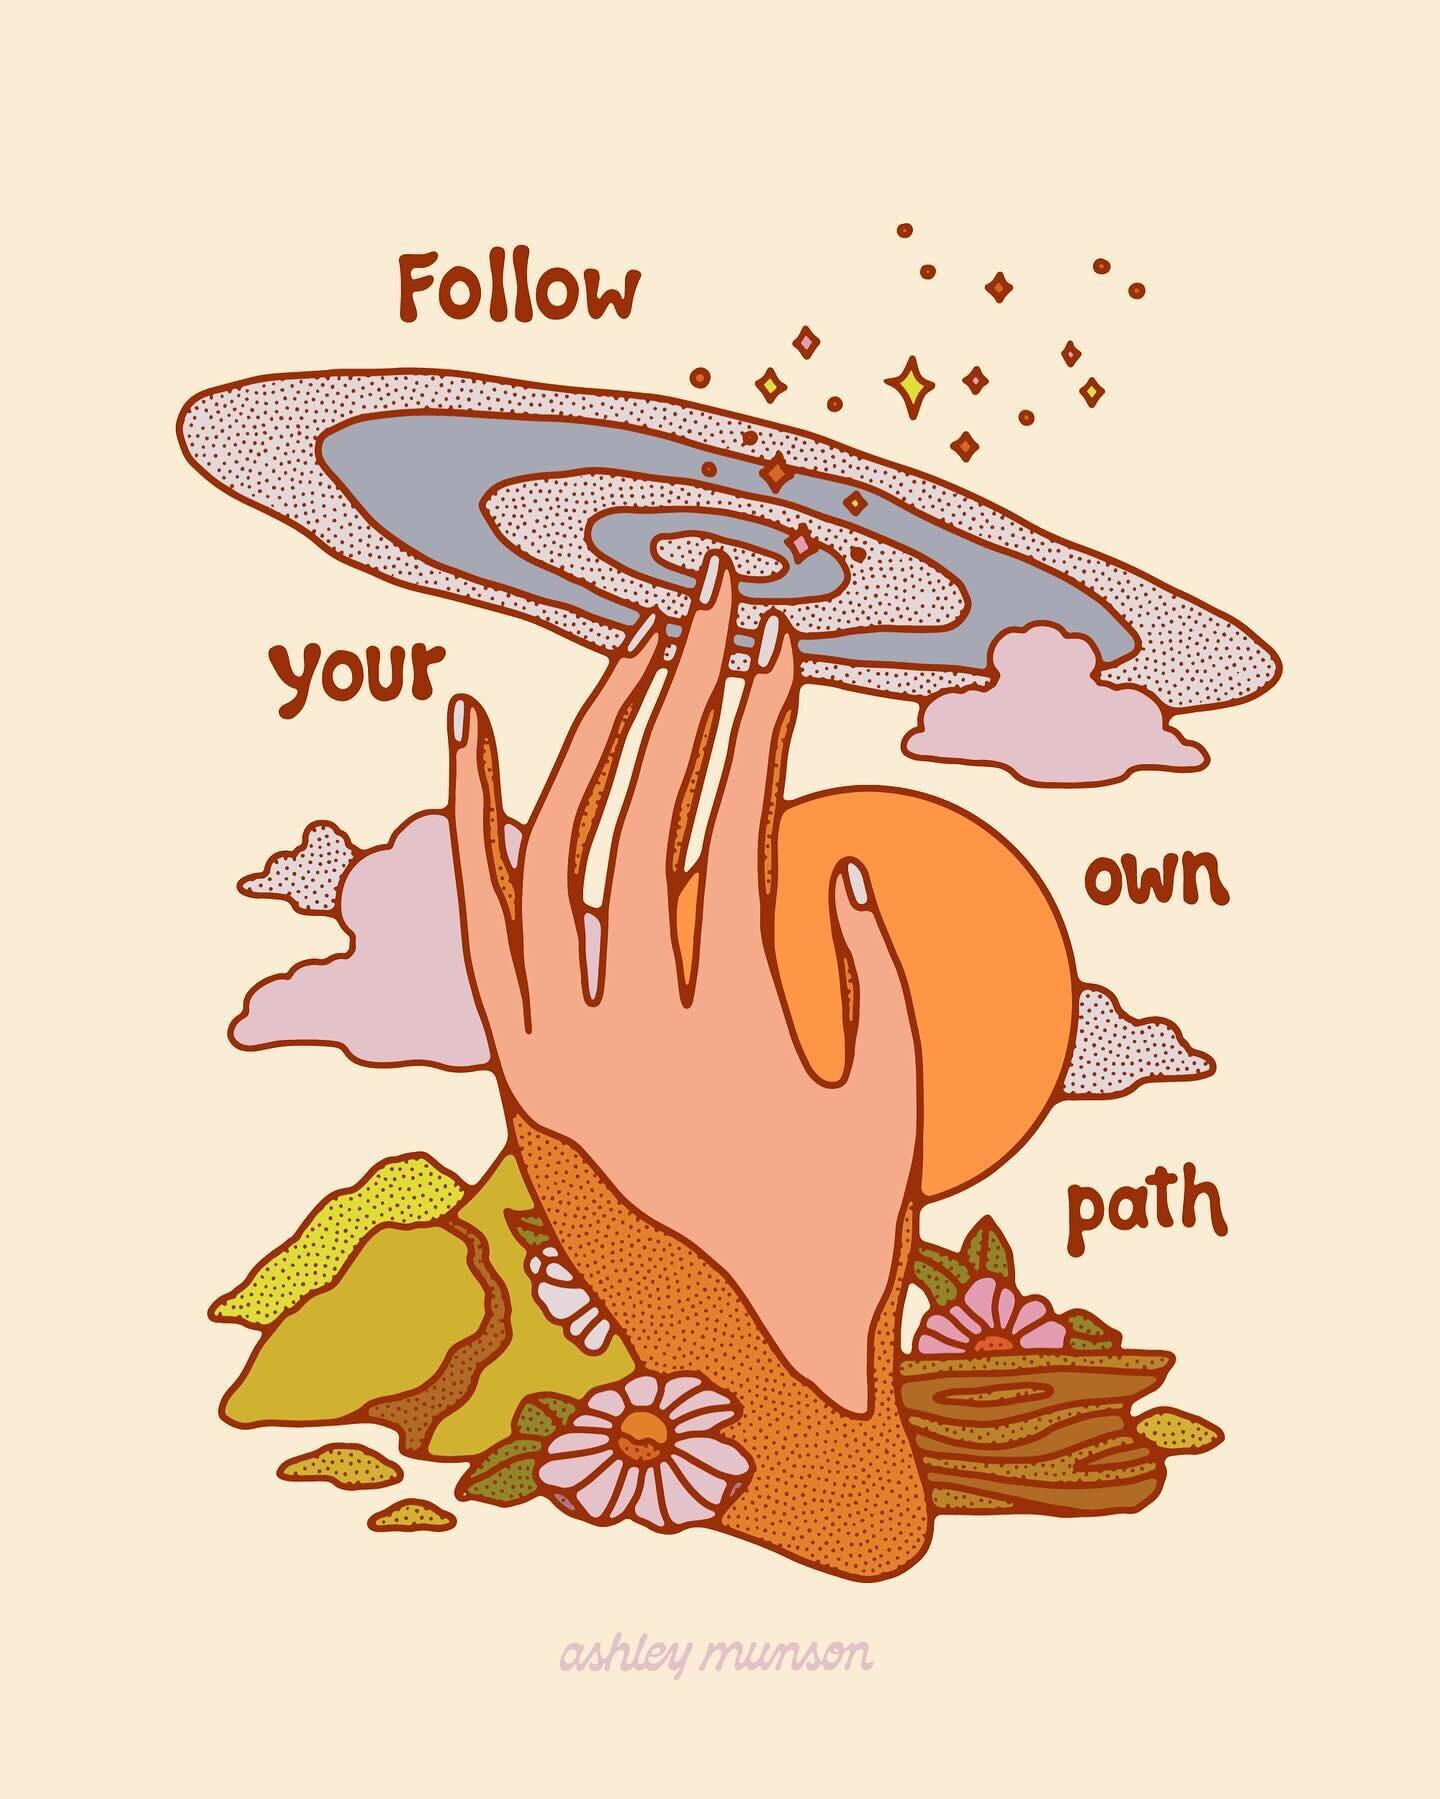 Your own path is the one to follow✨
.
.
.
.
.
.
#goodvibes #groovy #illustration #illustrator #procreate #digitalillustration #design #graphicart #graphicdesign #vintageart #vintagevibes